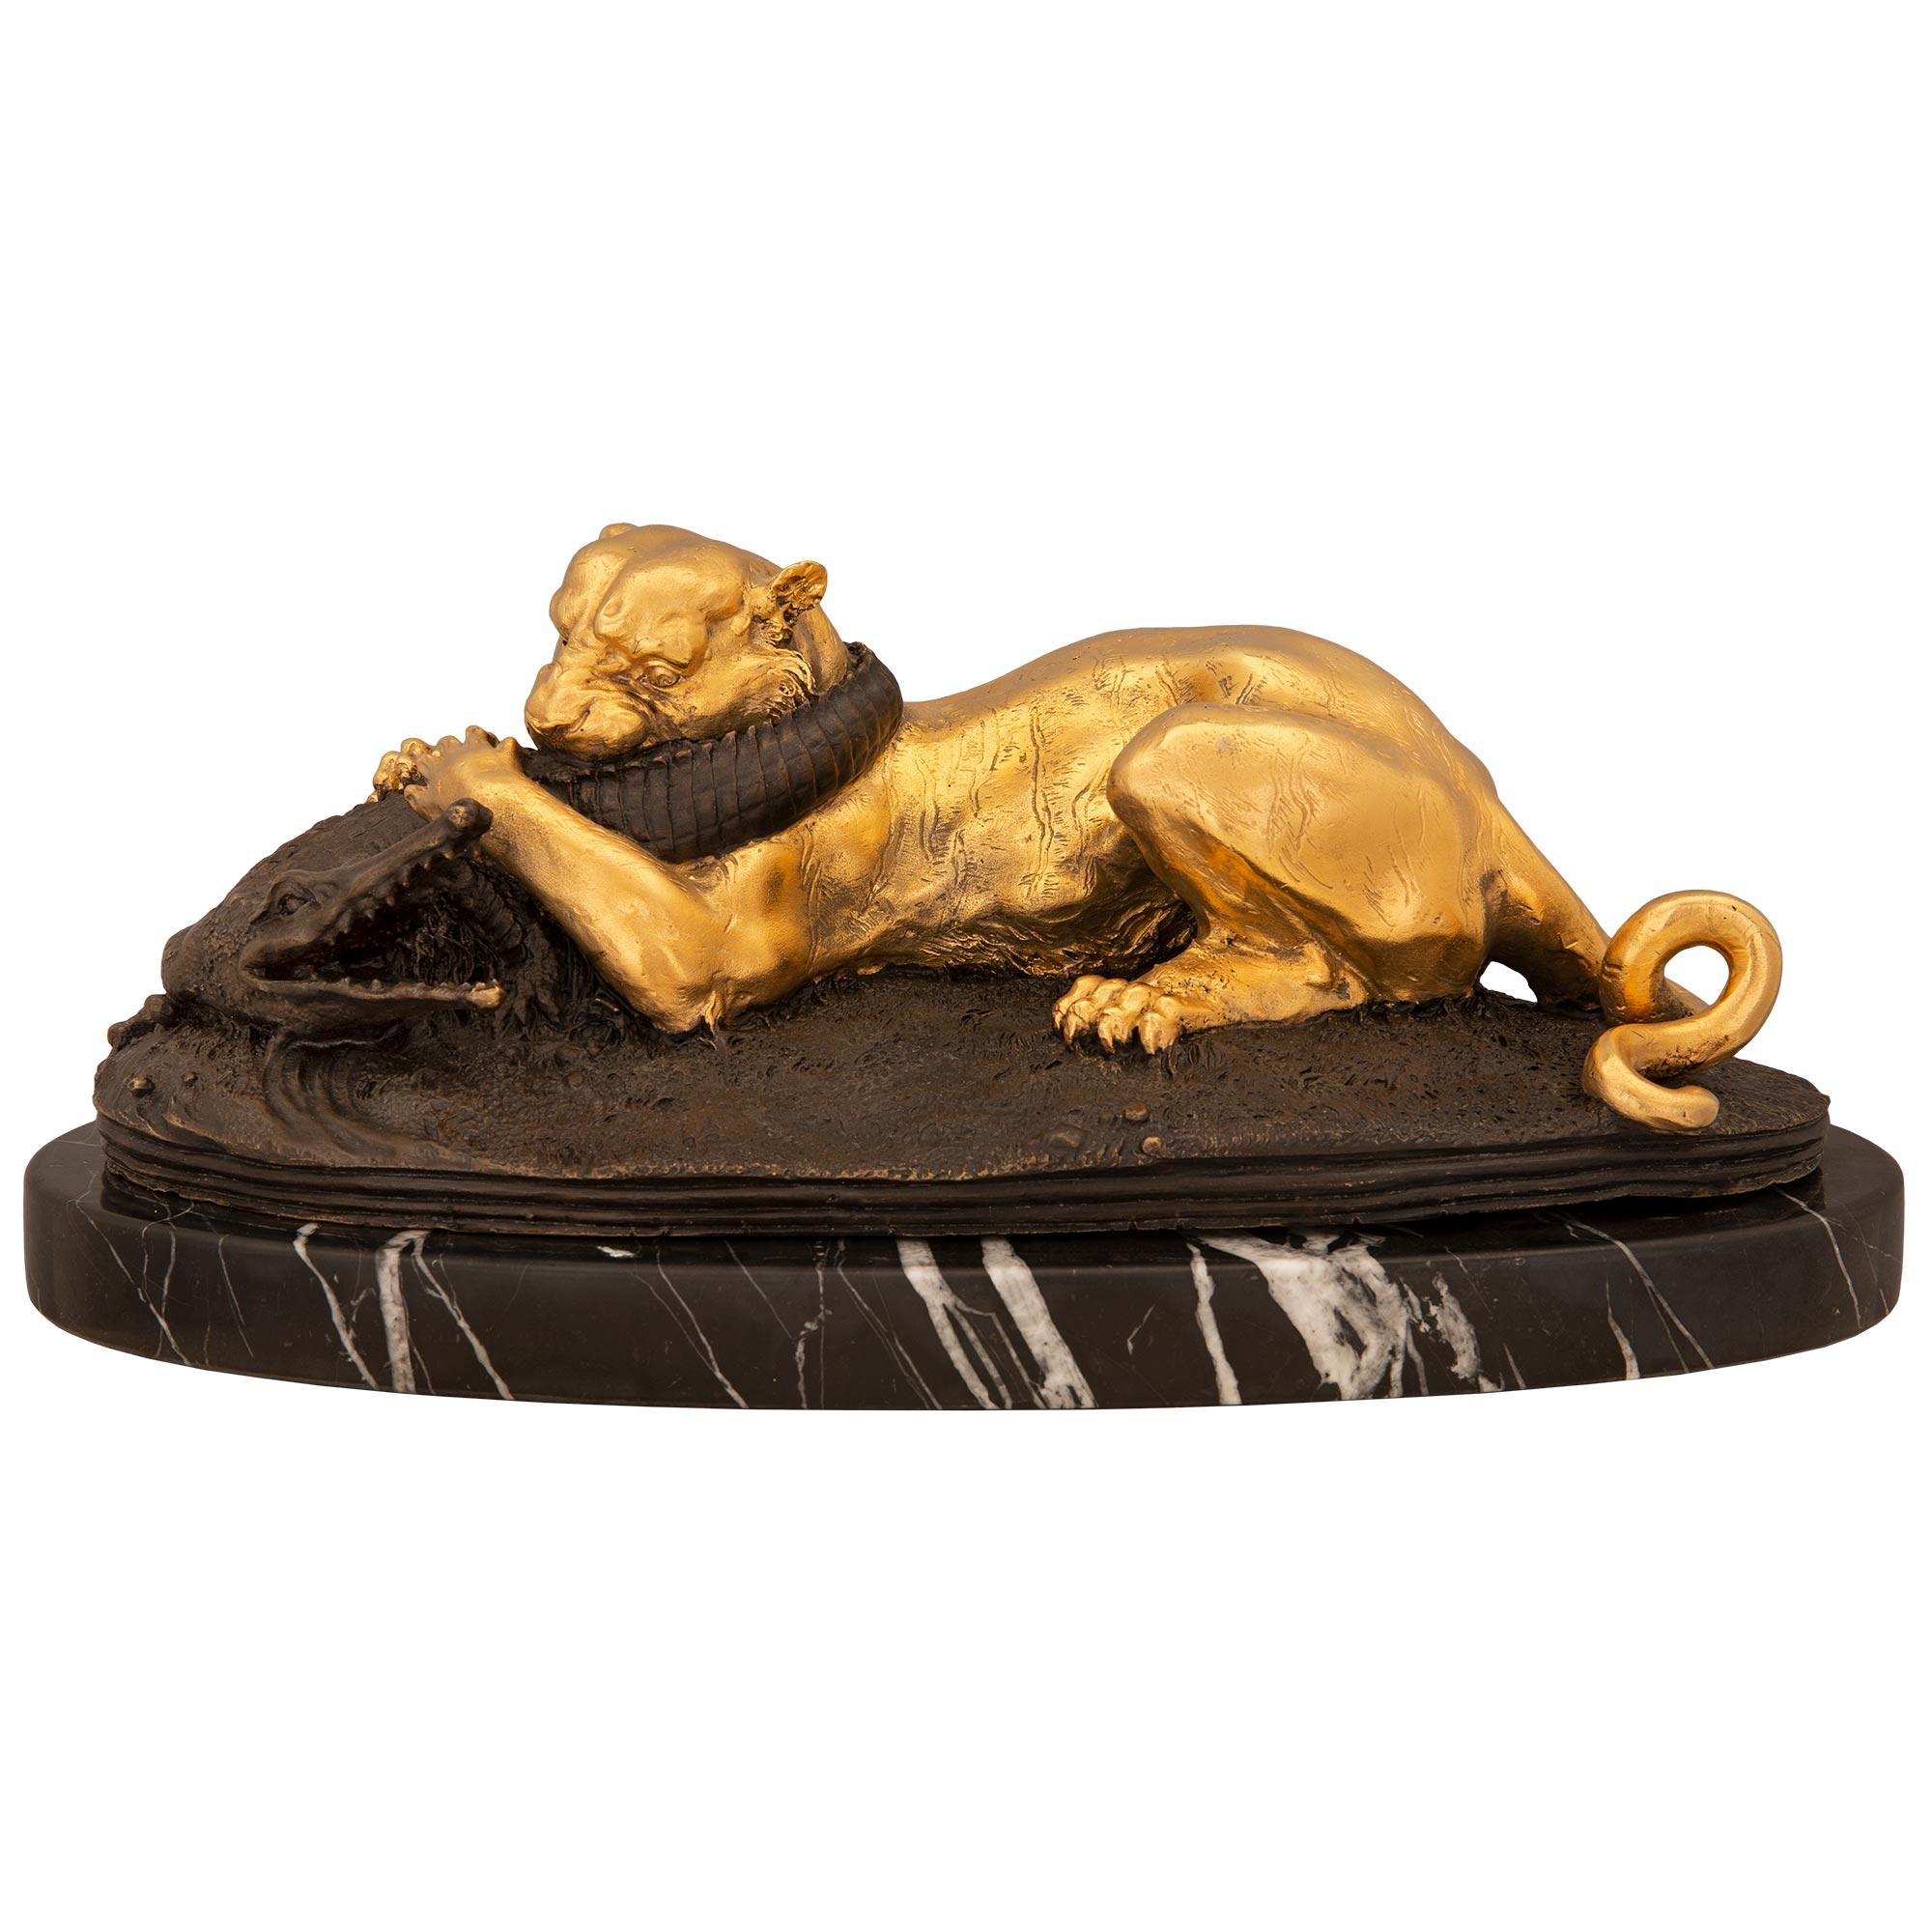 A stunning French 19th century patinated bronze and ormolu statue of a panther eating an alligator signed by Jules Moigniez. The statue is raised on an oblong base with a wonderfully executed ground like design. The wonderfully executed ormolu